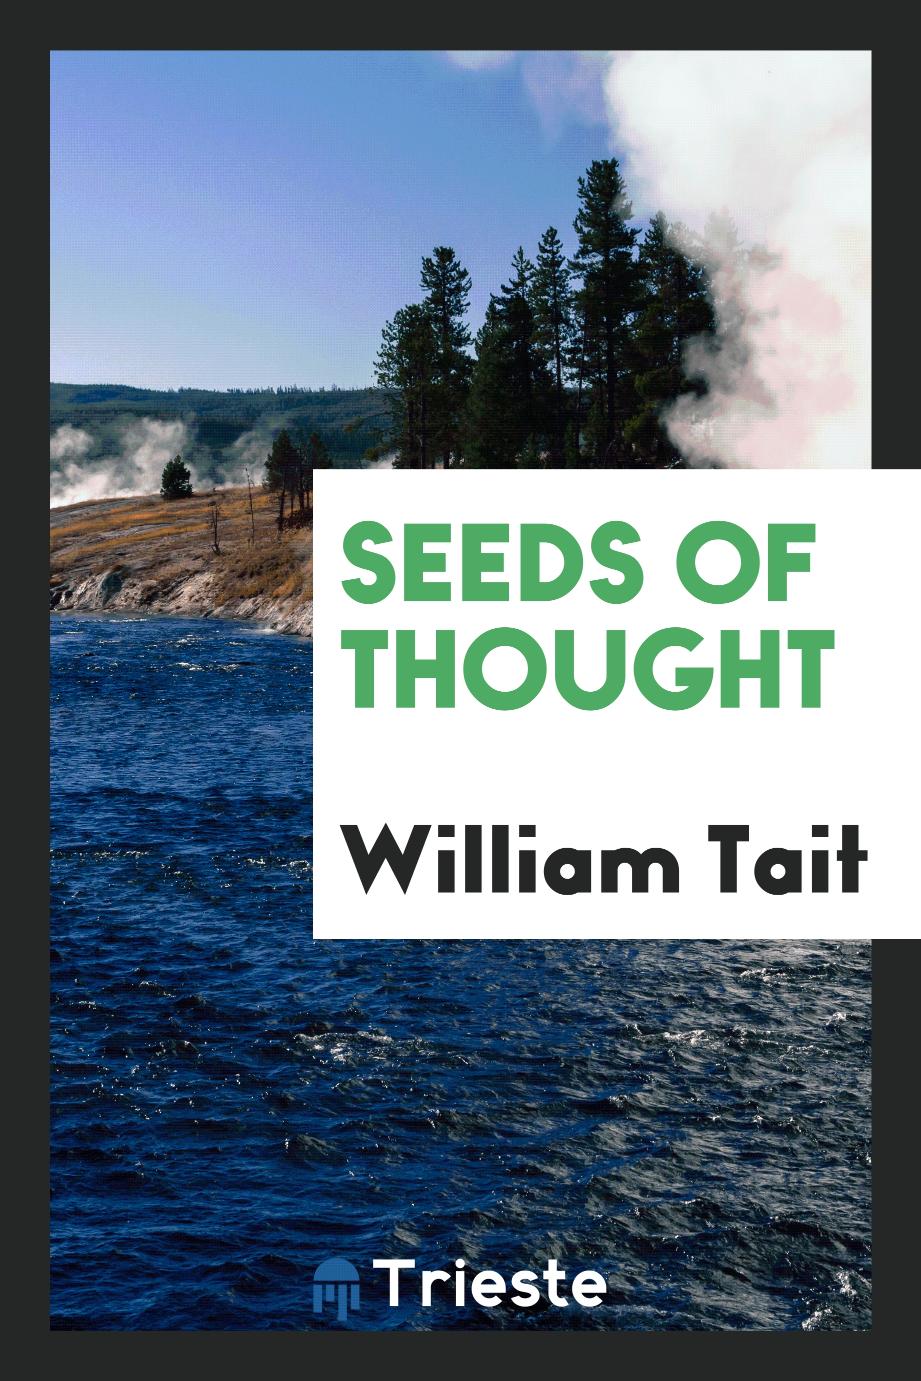 Seeds of Thought